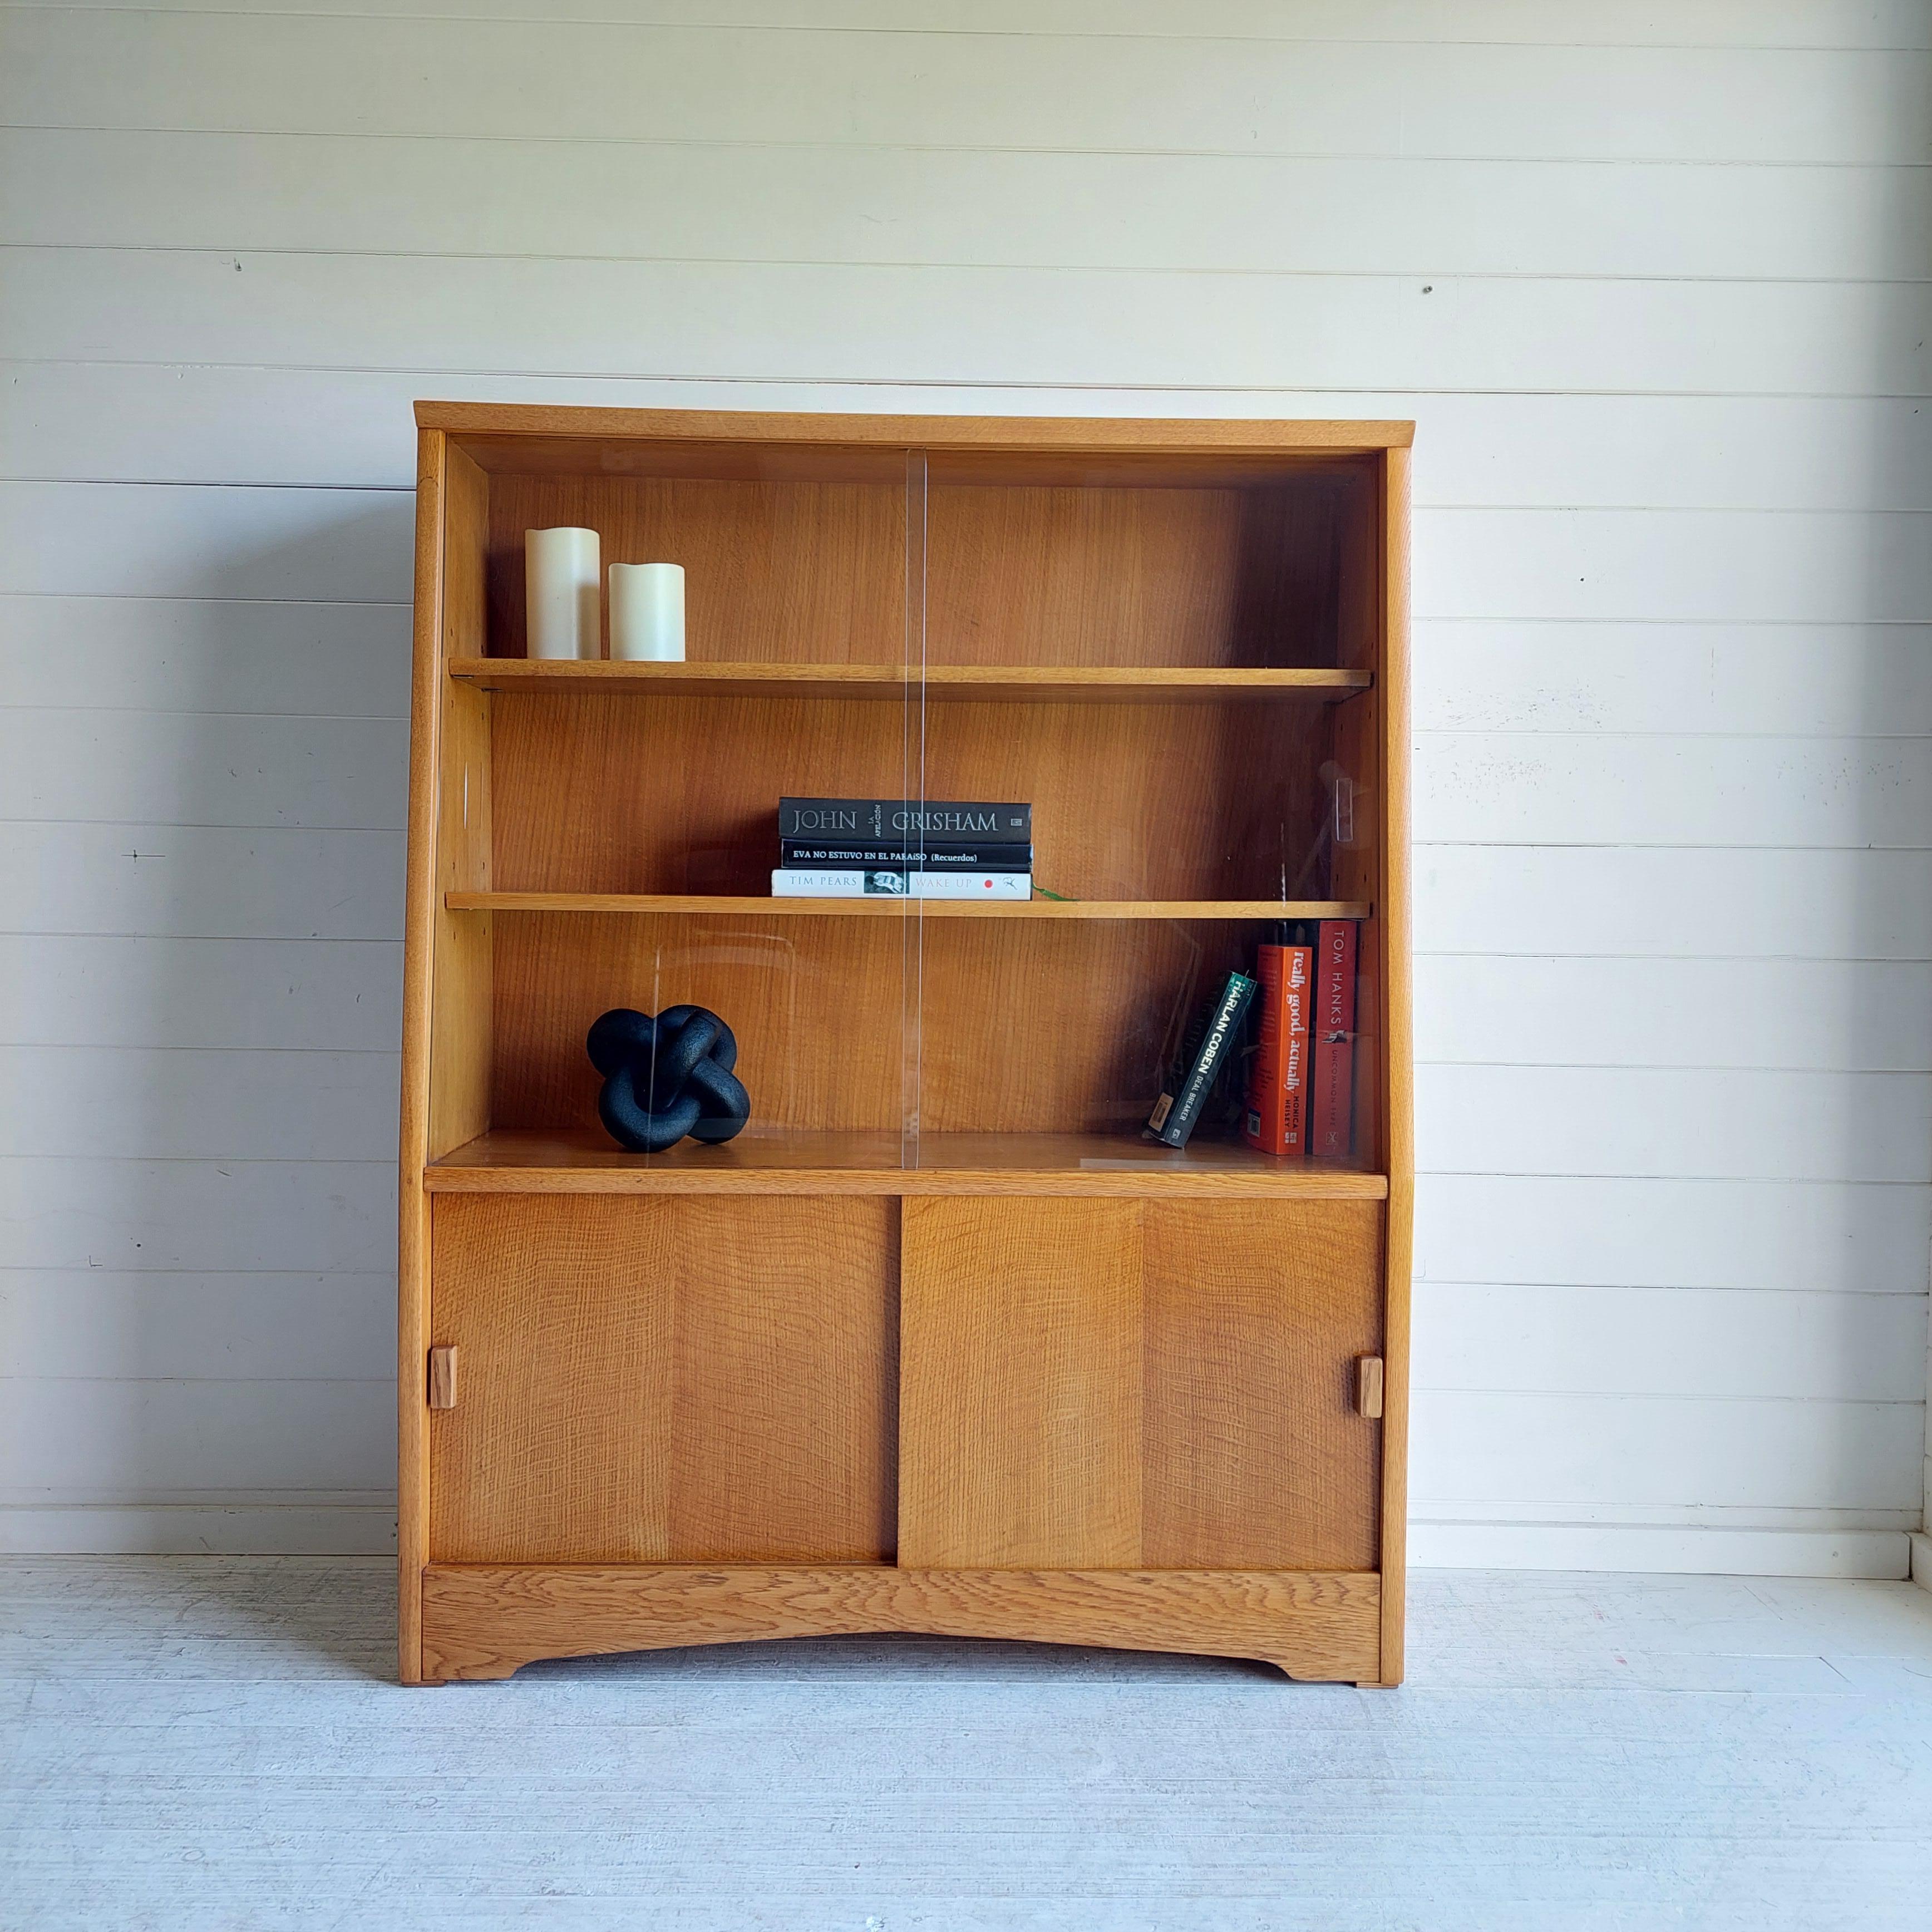 Beautiful Mid Century Oak Bookcase manufactured by Herbert E Gibbs
A wonderful 50s/60s  bookcase or display unit with sliding glass doors, shelves and cupboard section.
This is a top quality, sleek and stylish piece of furniture perfect for the